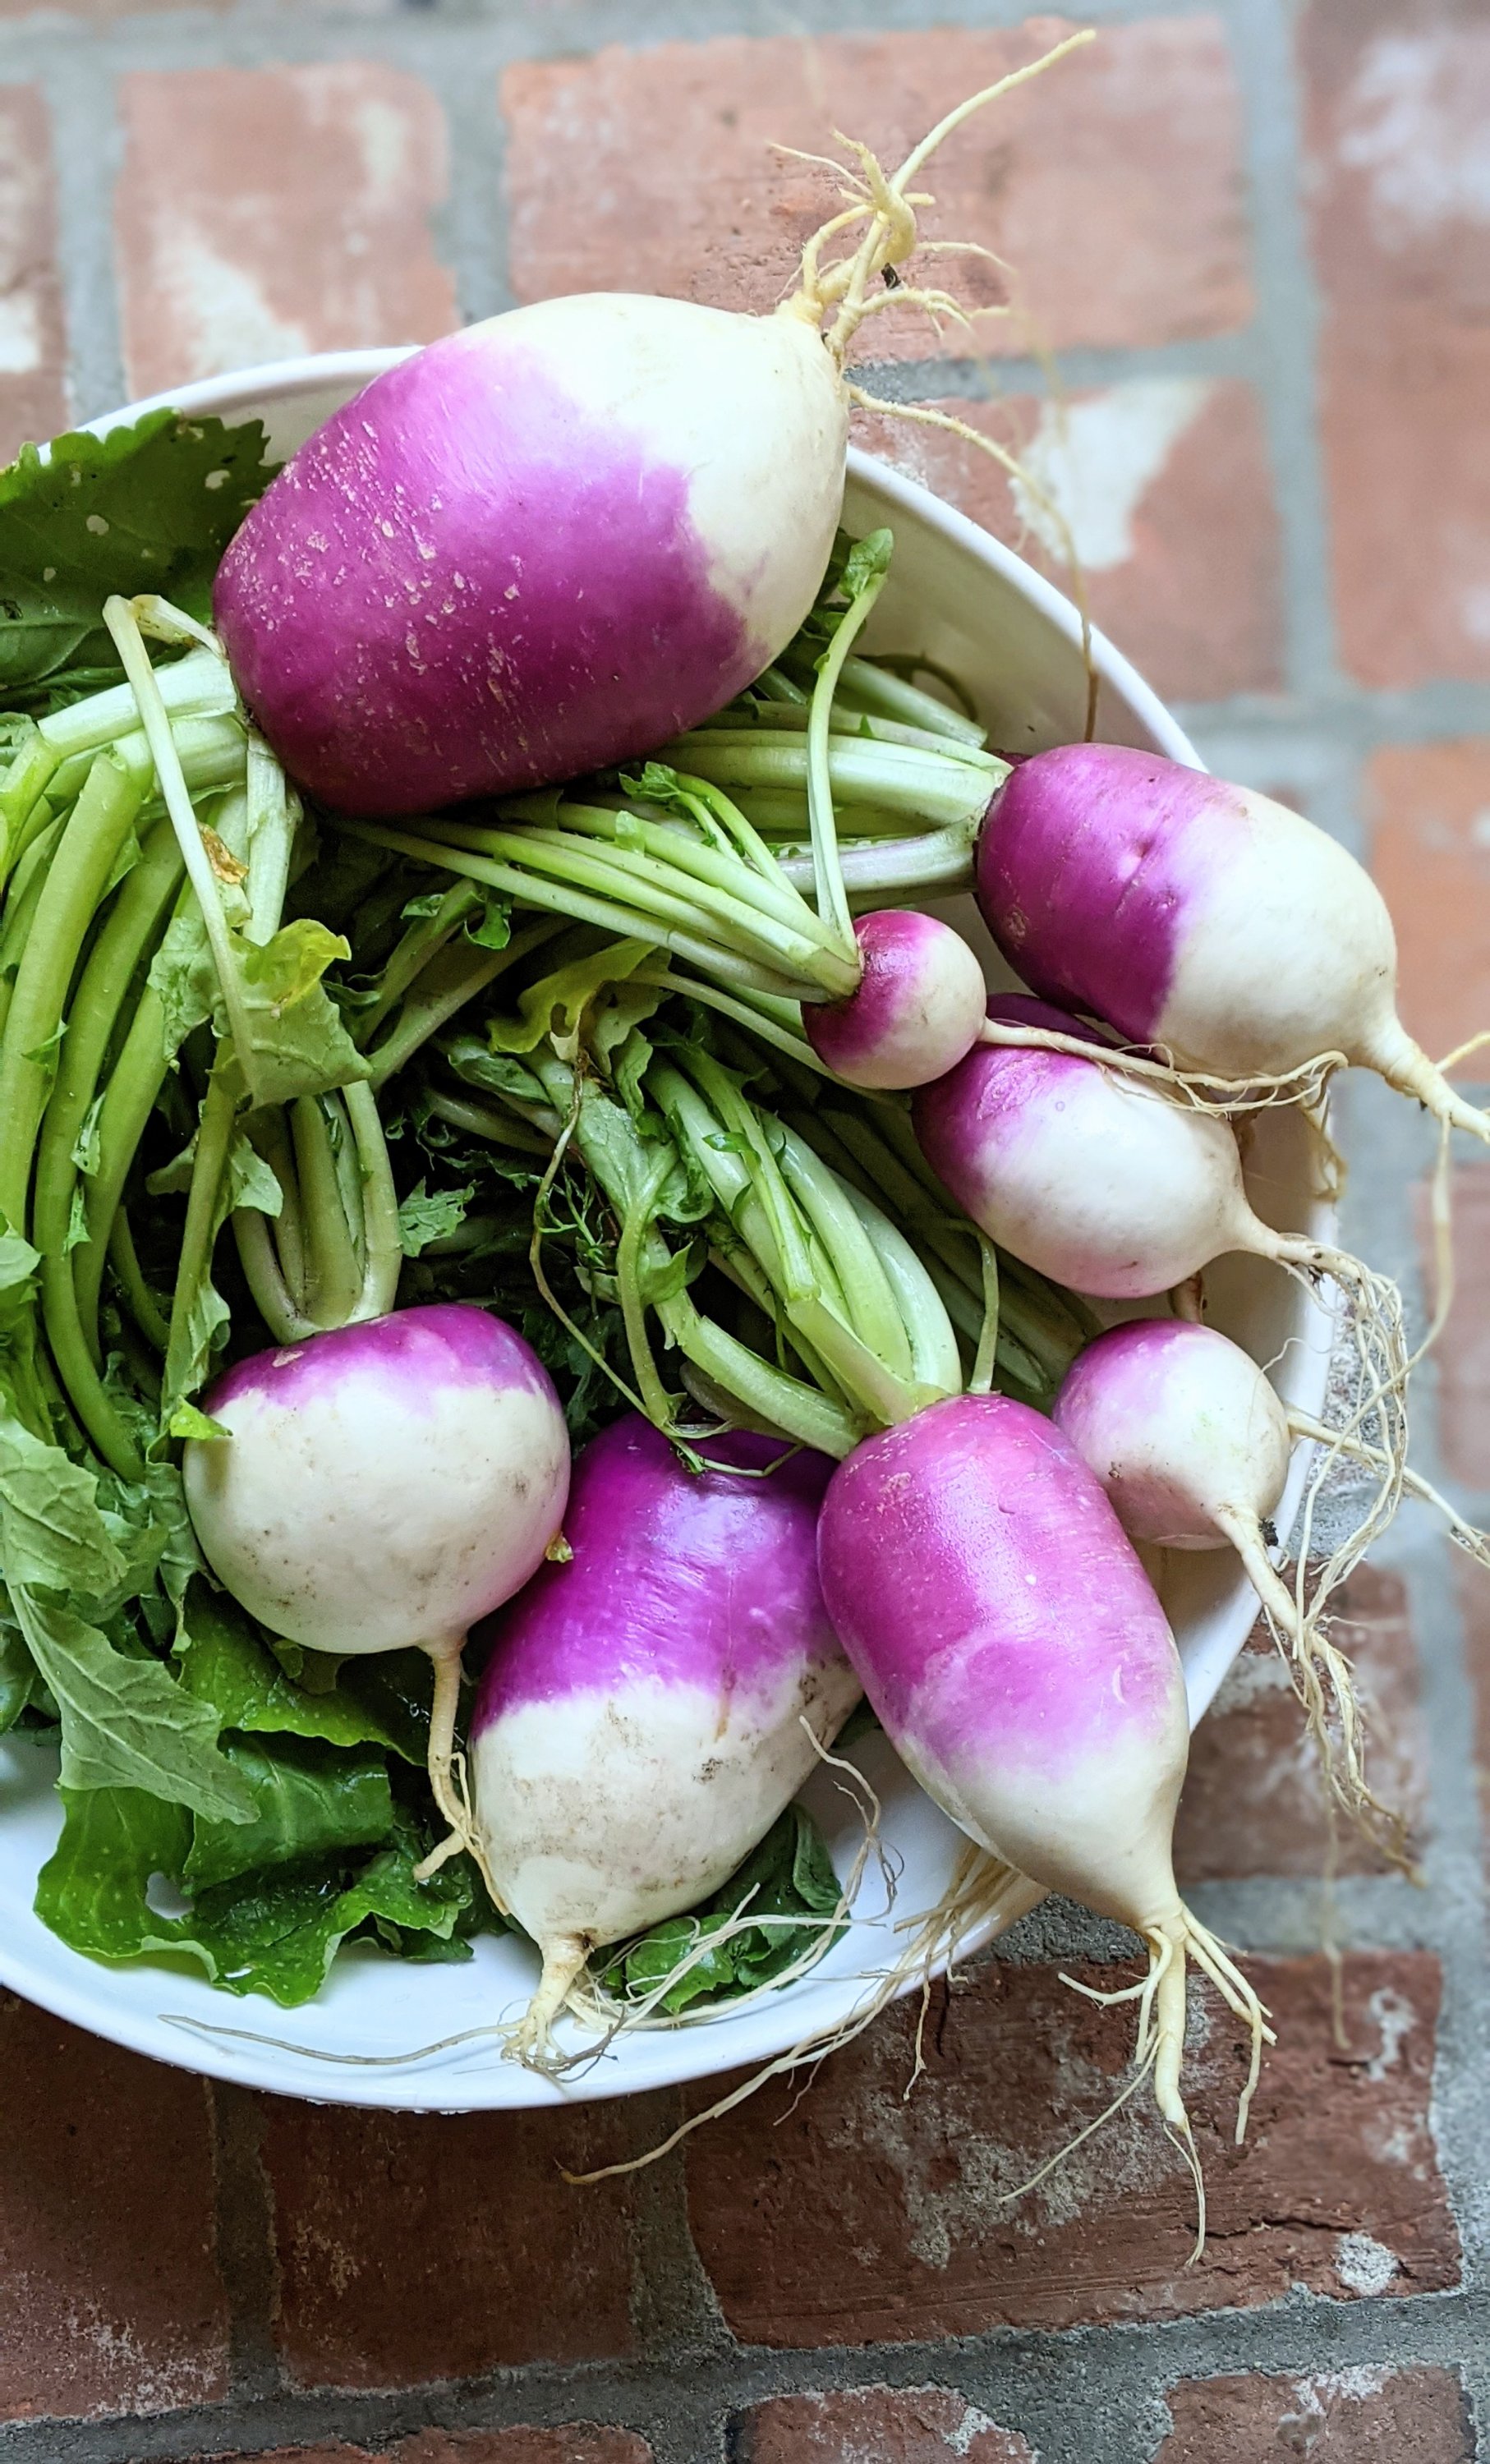 fresh garden turnips recipes from the garden how do you eat turnips what to do with turnip tops recipes with turnip greens vegan keto turnip green recipes